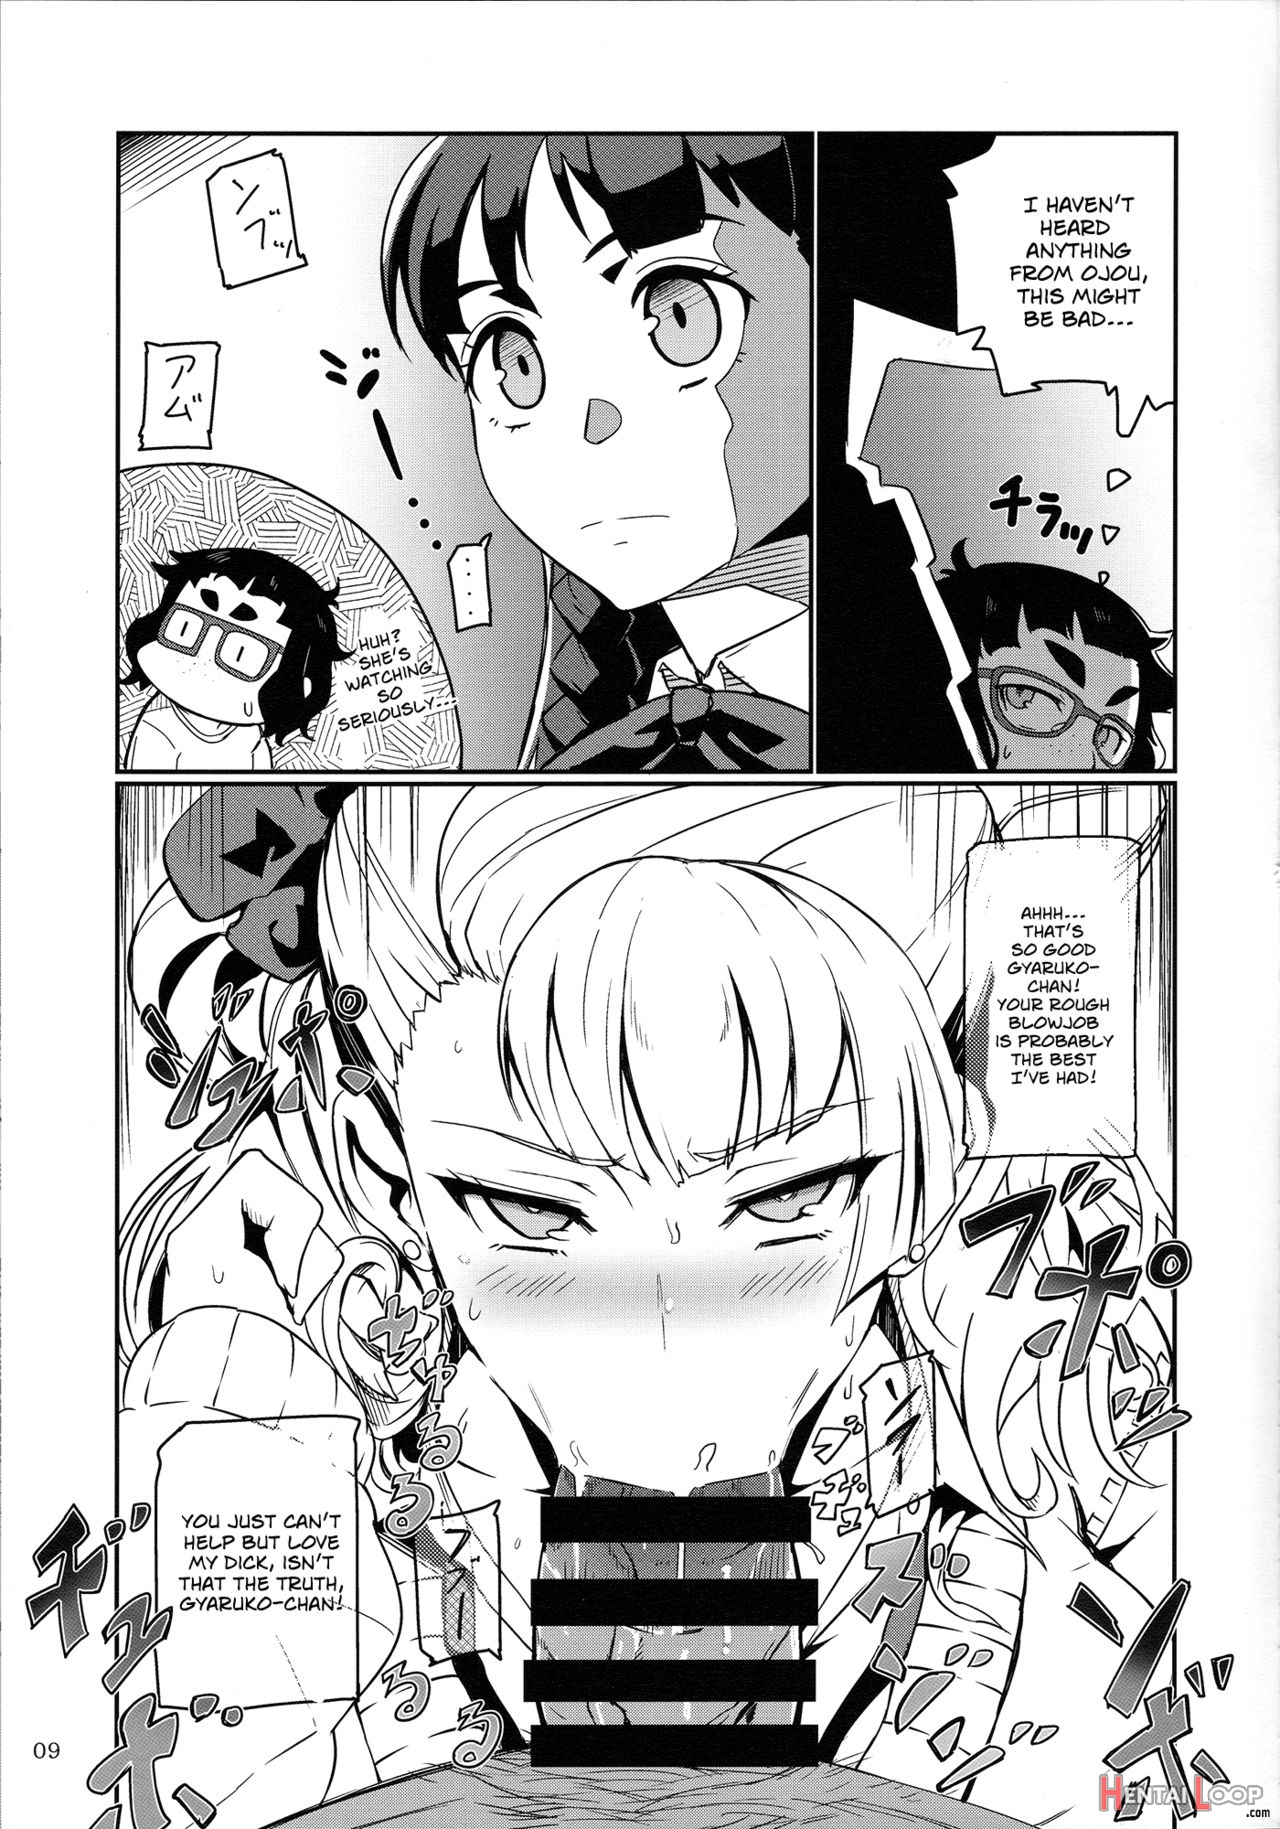 Galko Ah! page 8